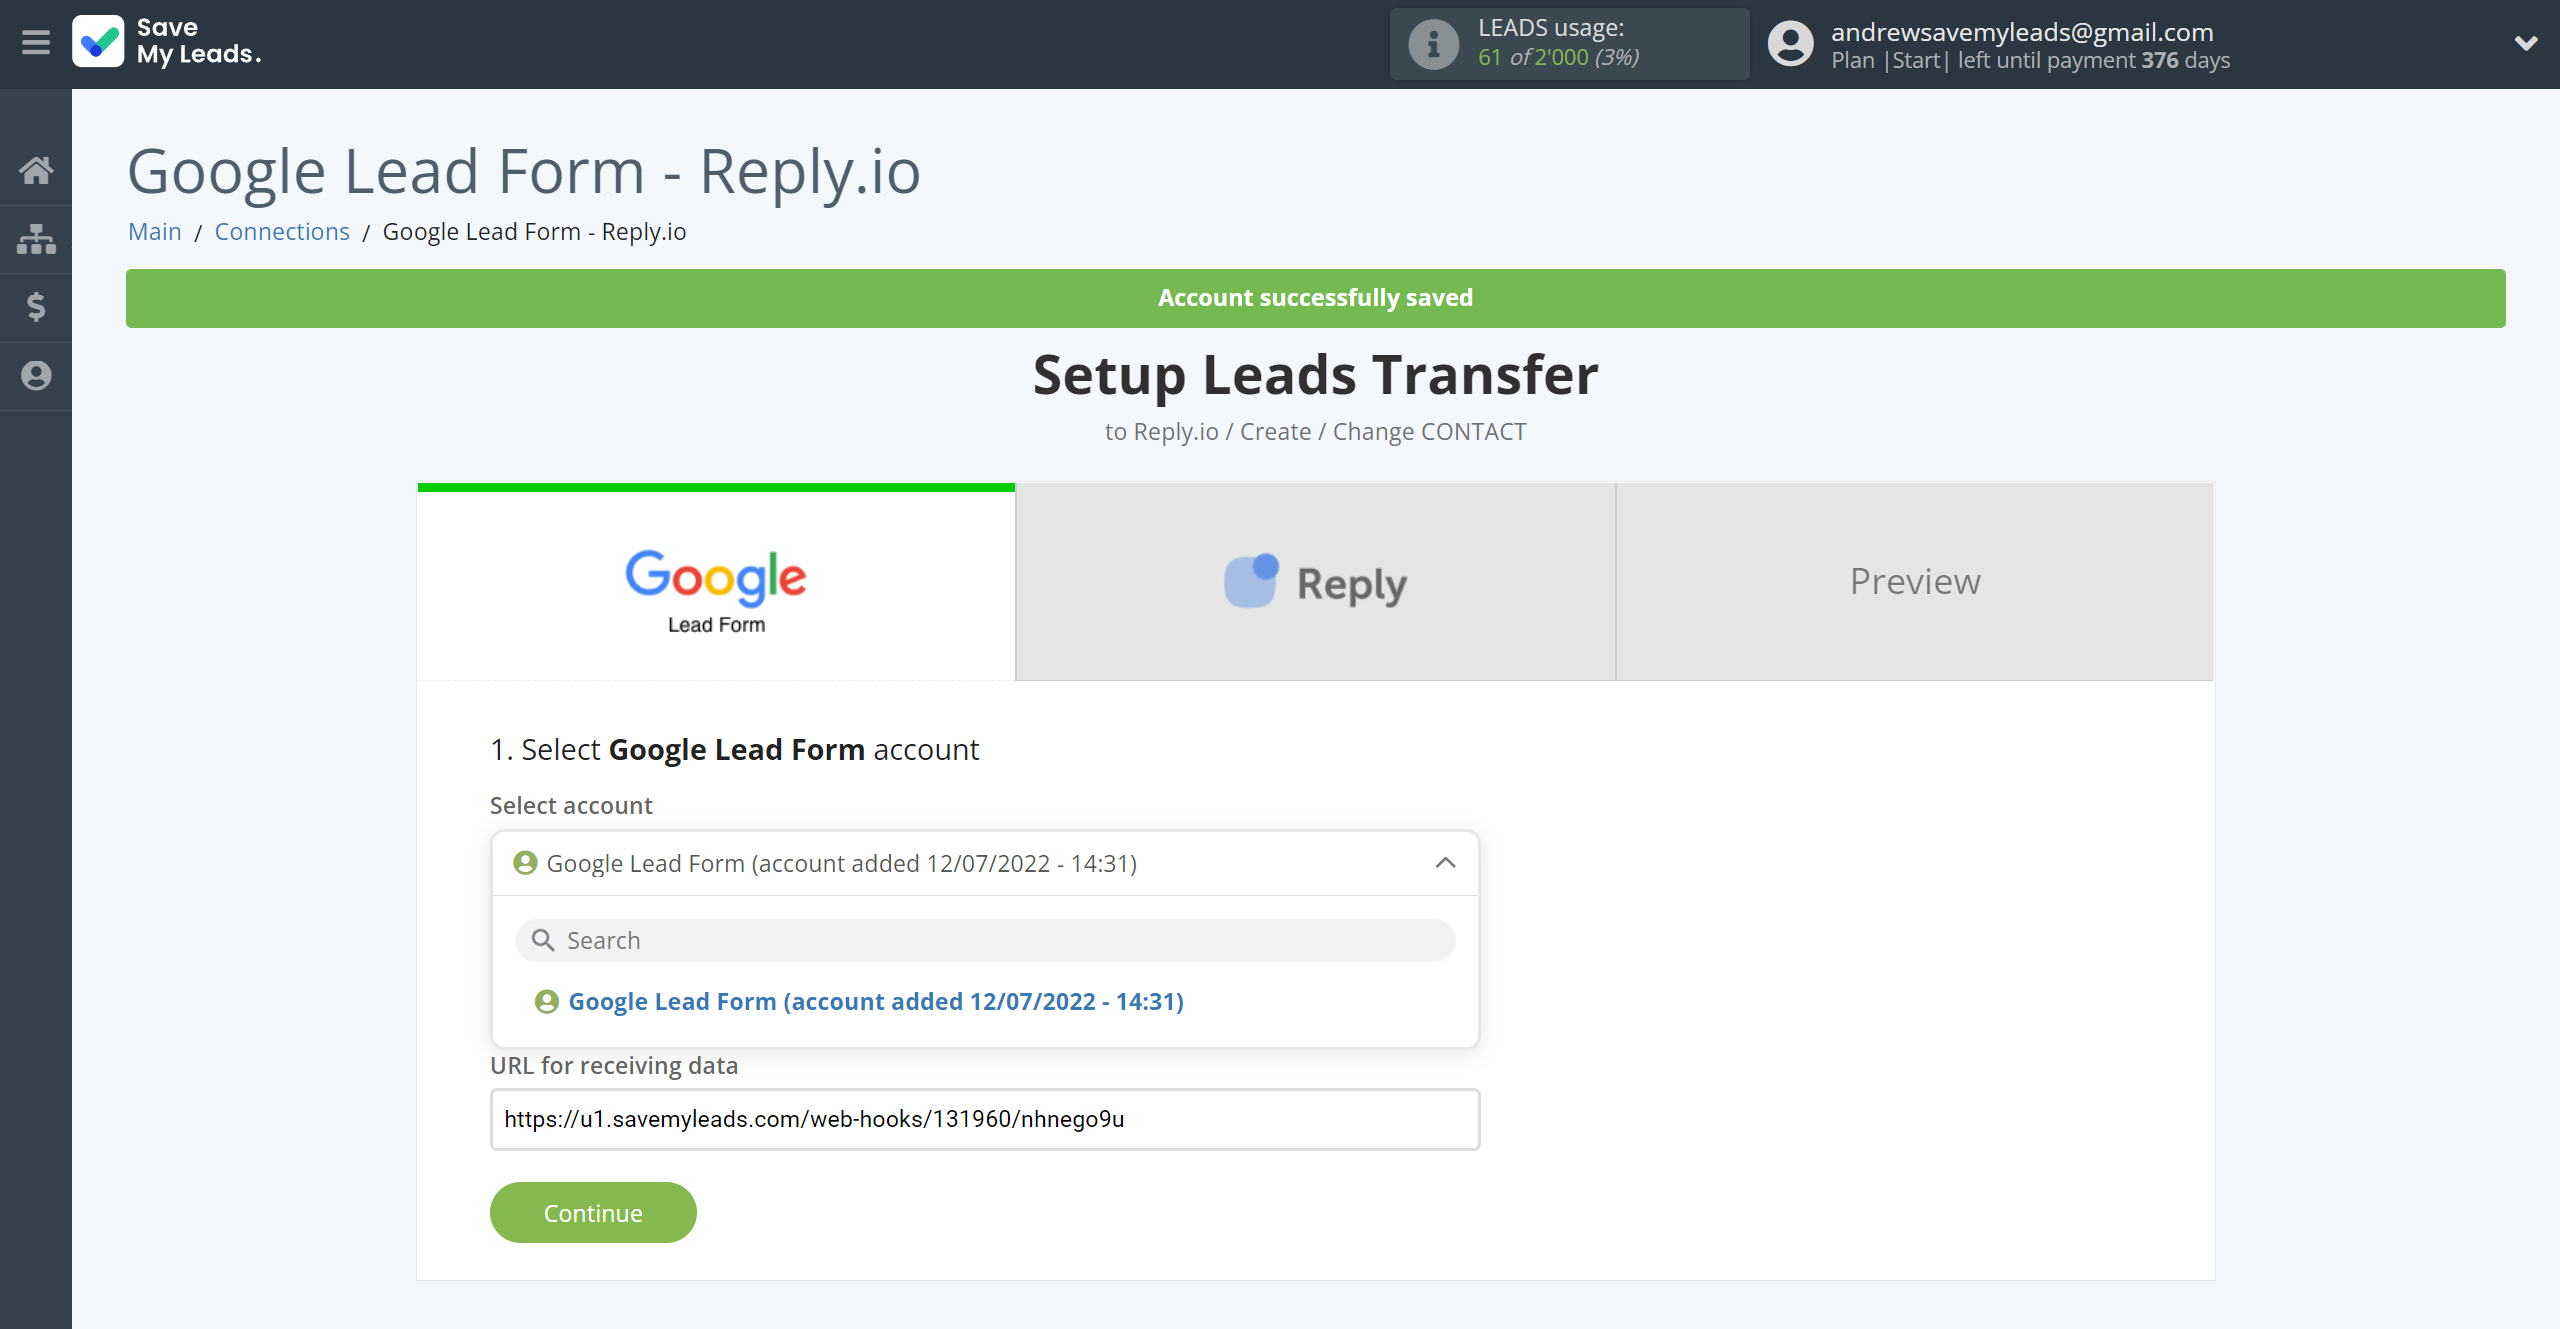 How to Connect Google Lead Form with Reply.io | Data Source account selection